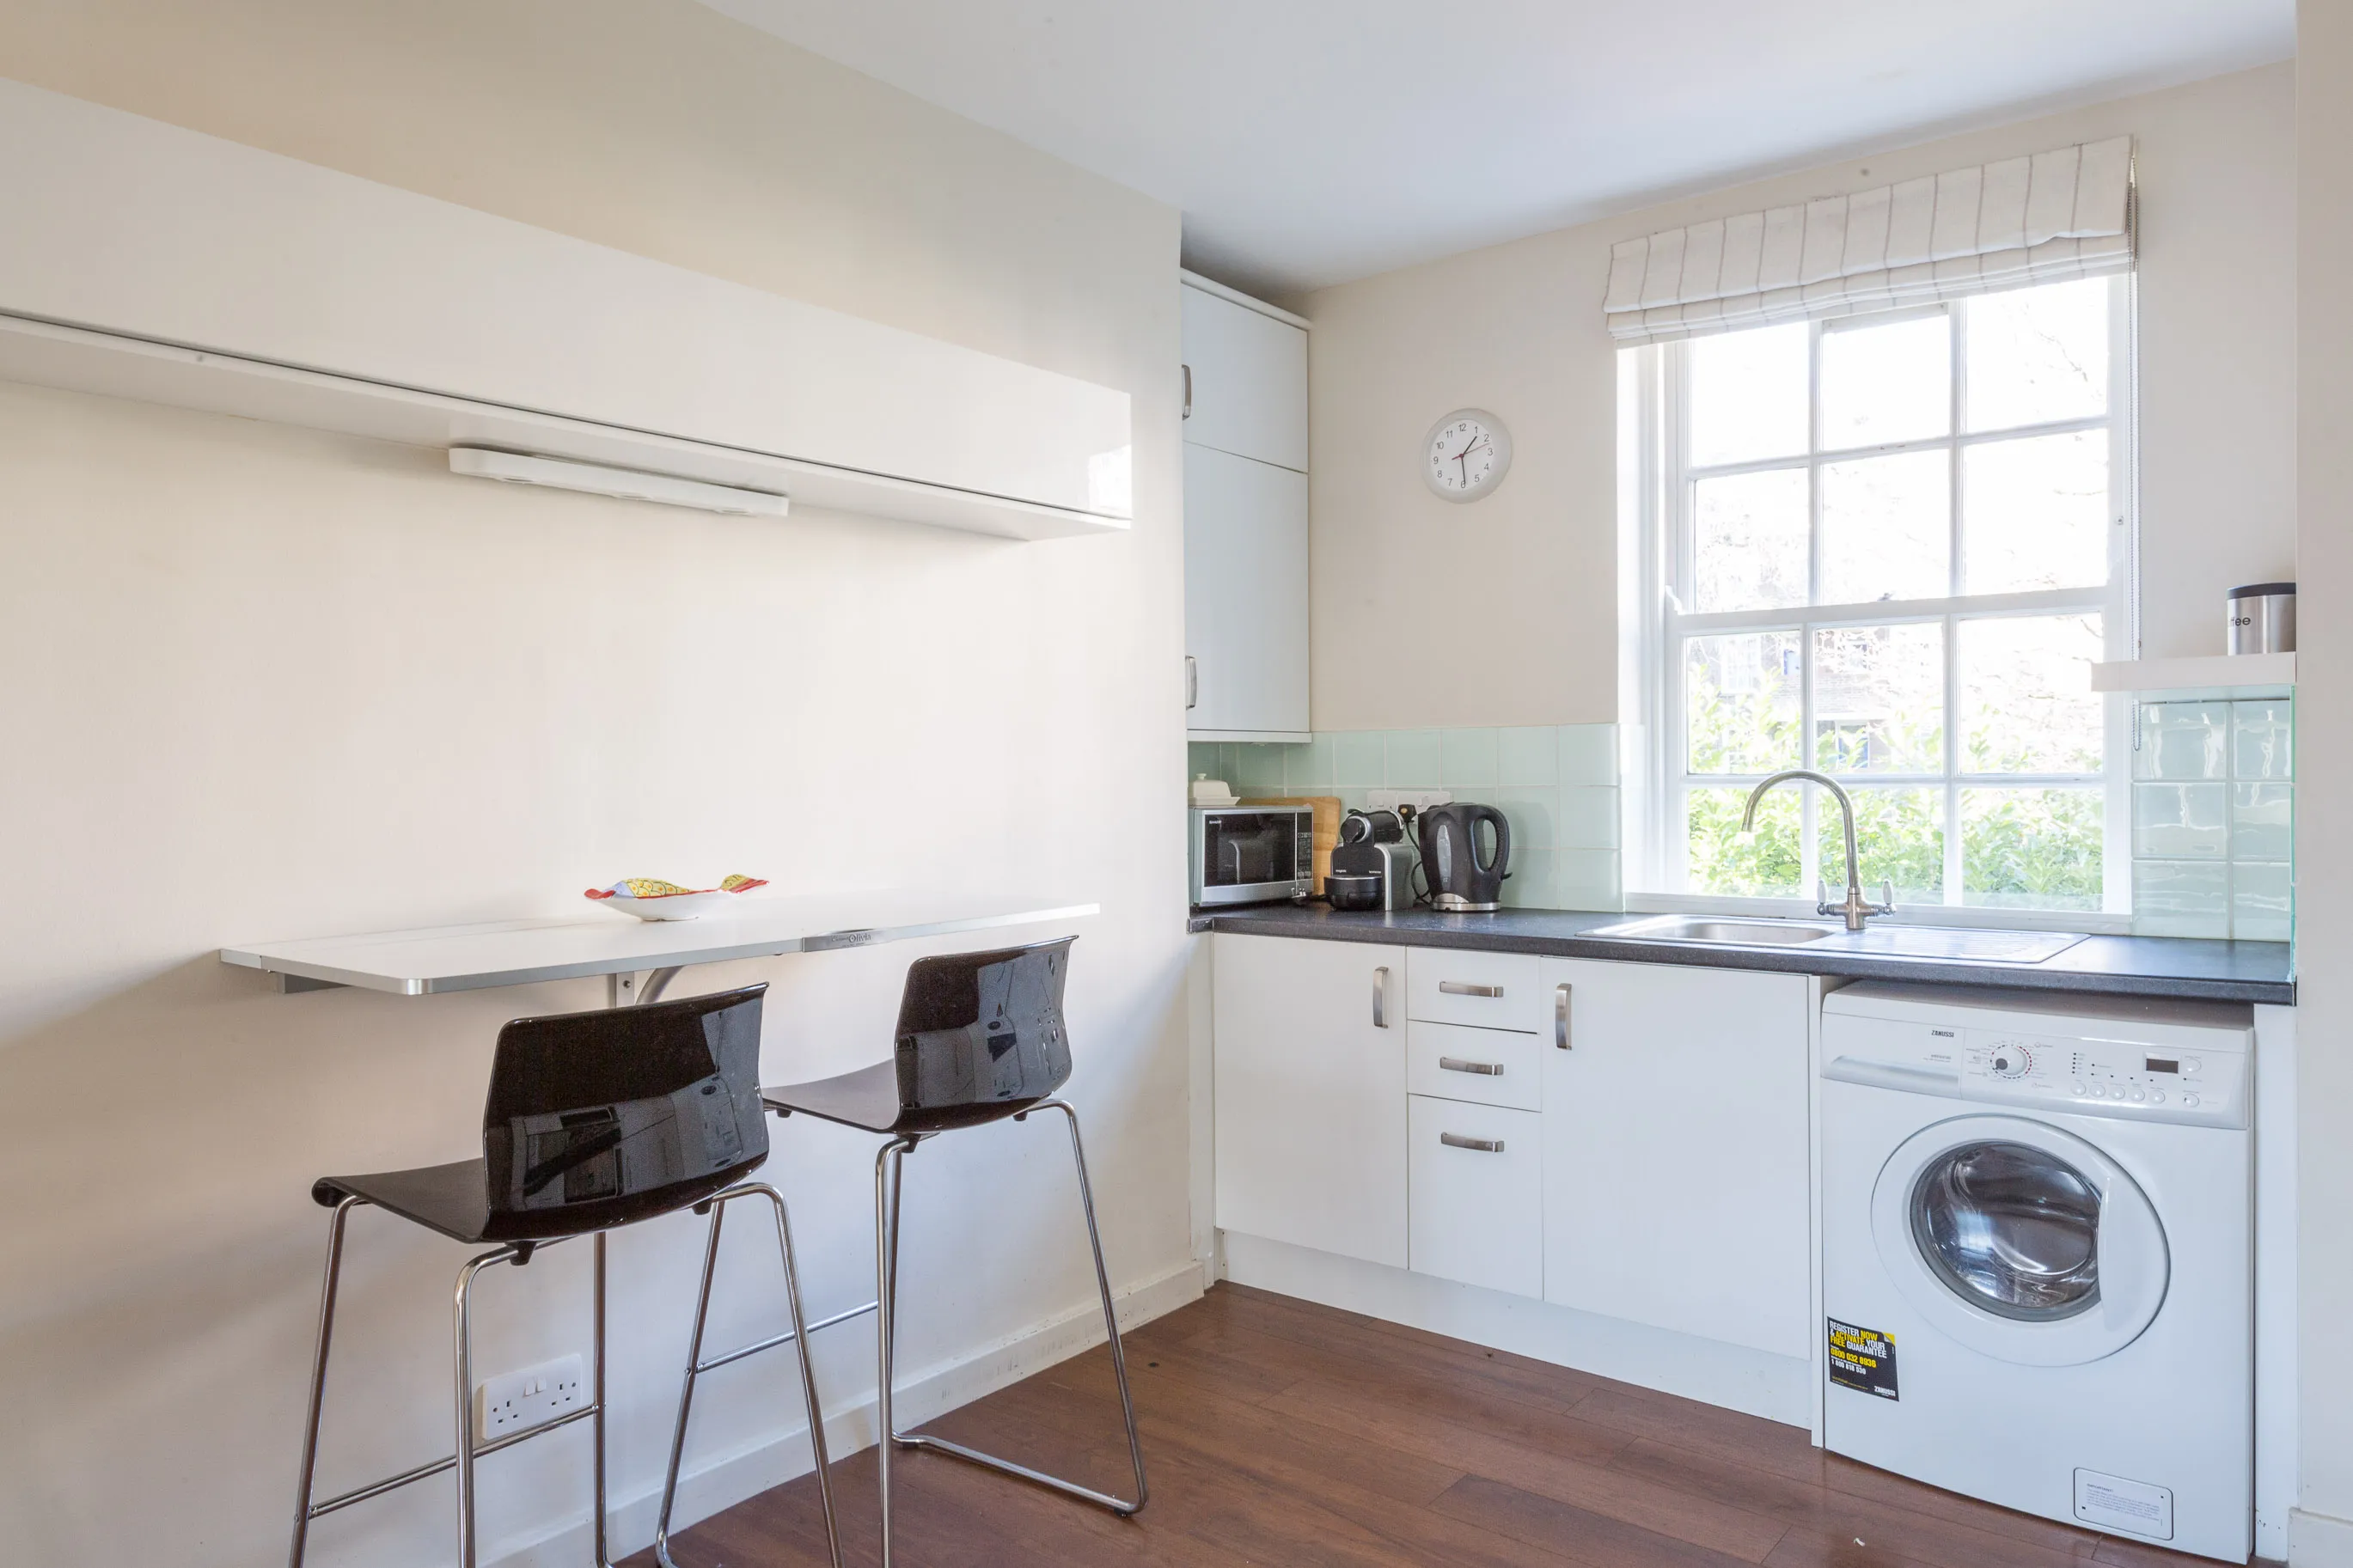 Clarendon Road, holiday apartment in Notting Hill, London